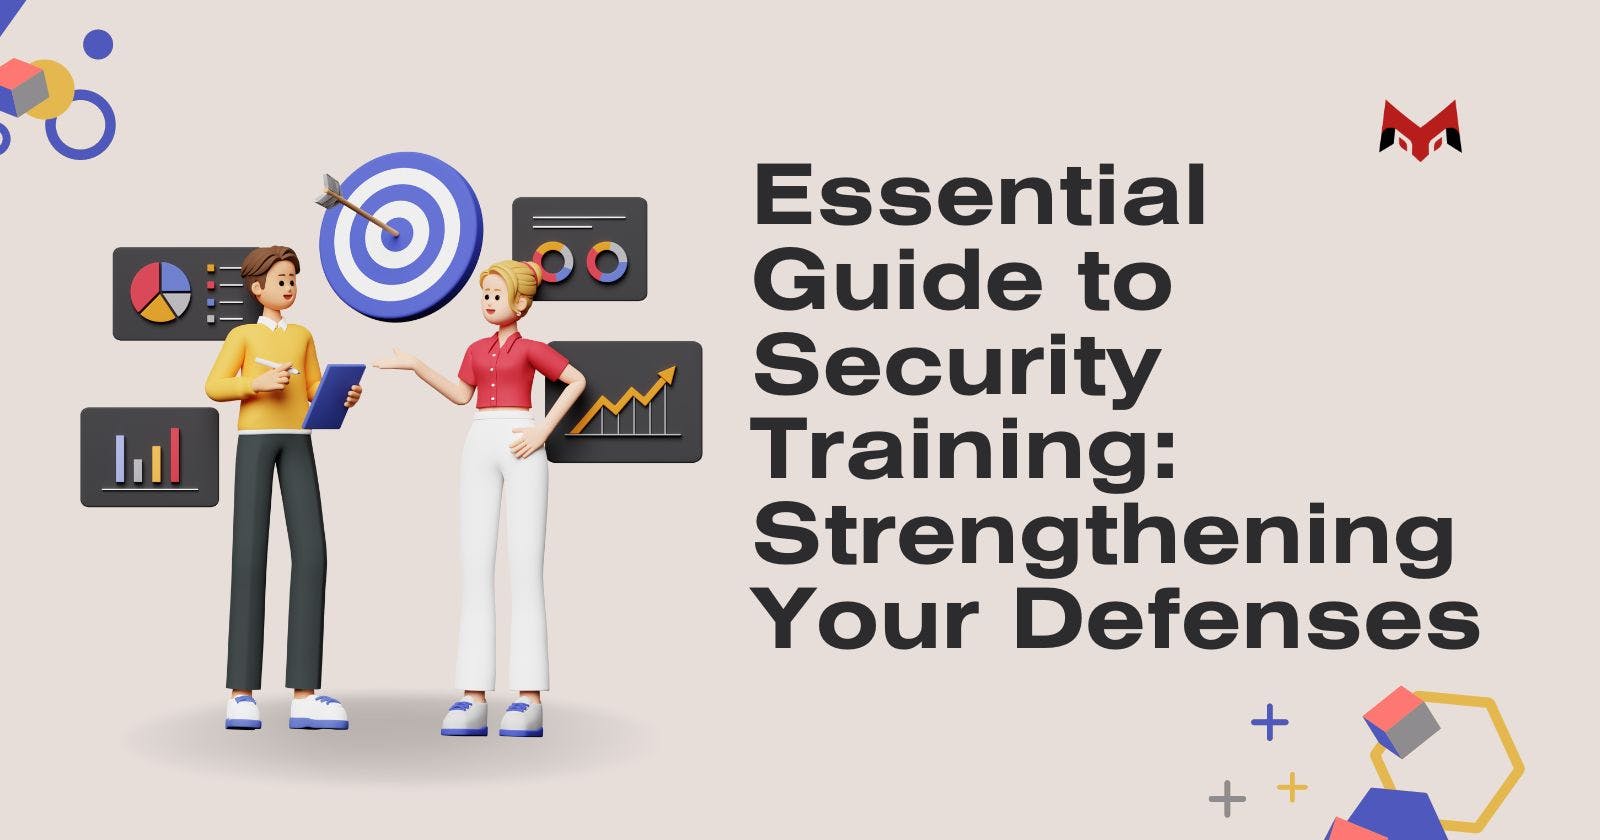 Essential Guide to Security Training: Strengthening Your Defenses